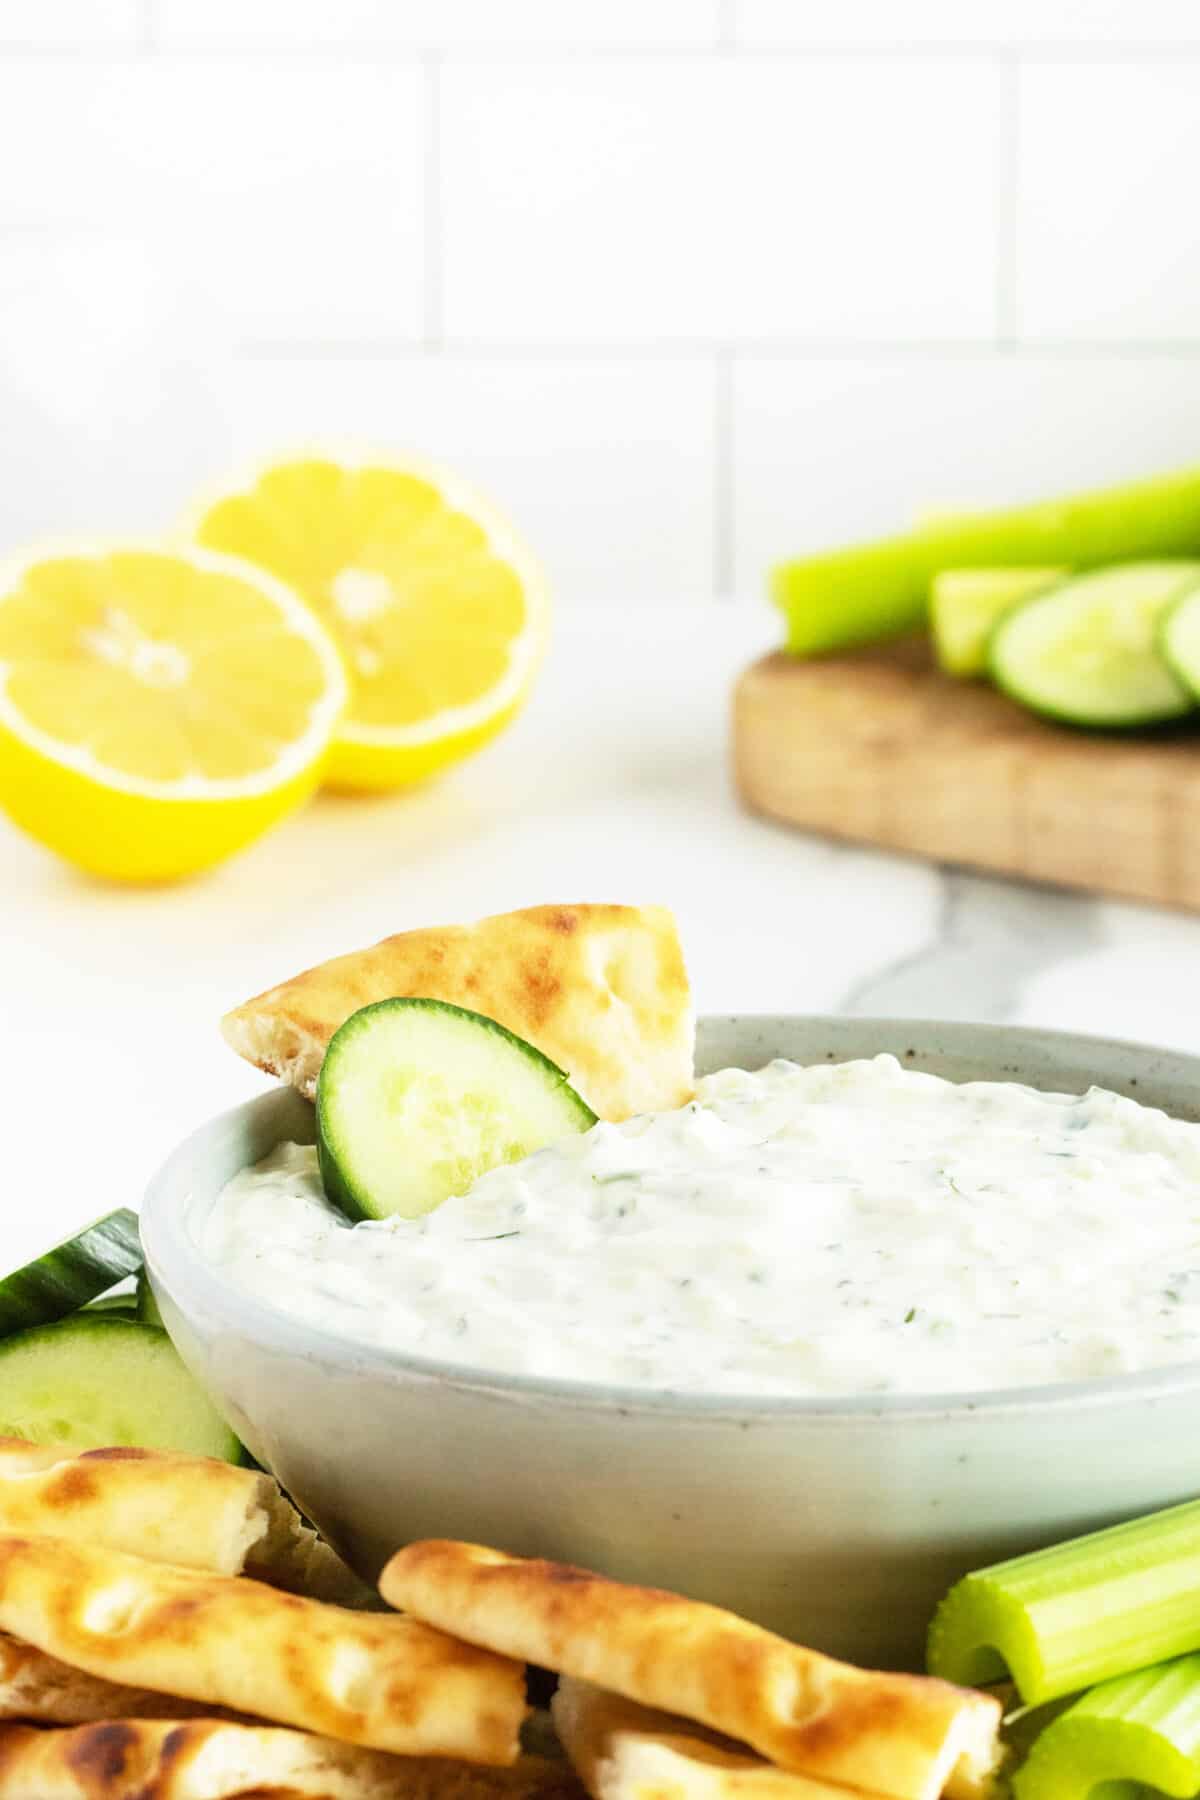 tzatziki sauce in a white bowl with a chip and cucumber in the bowl